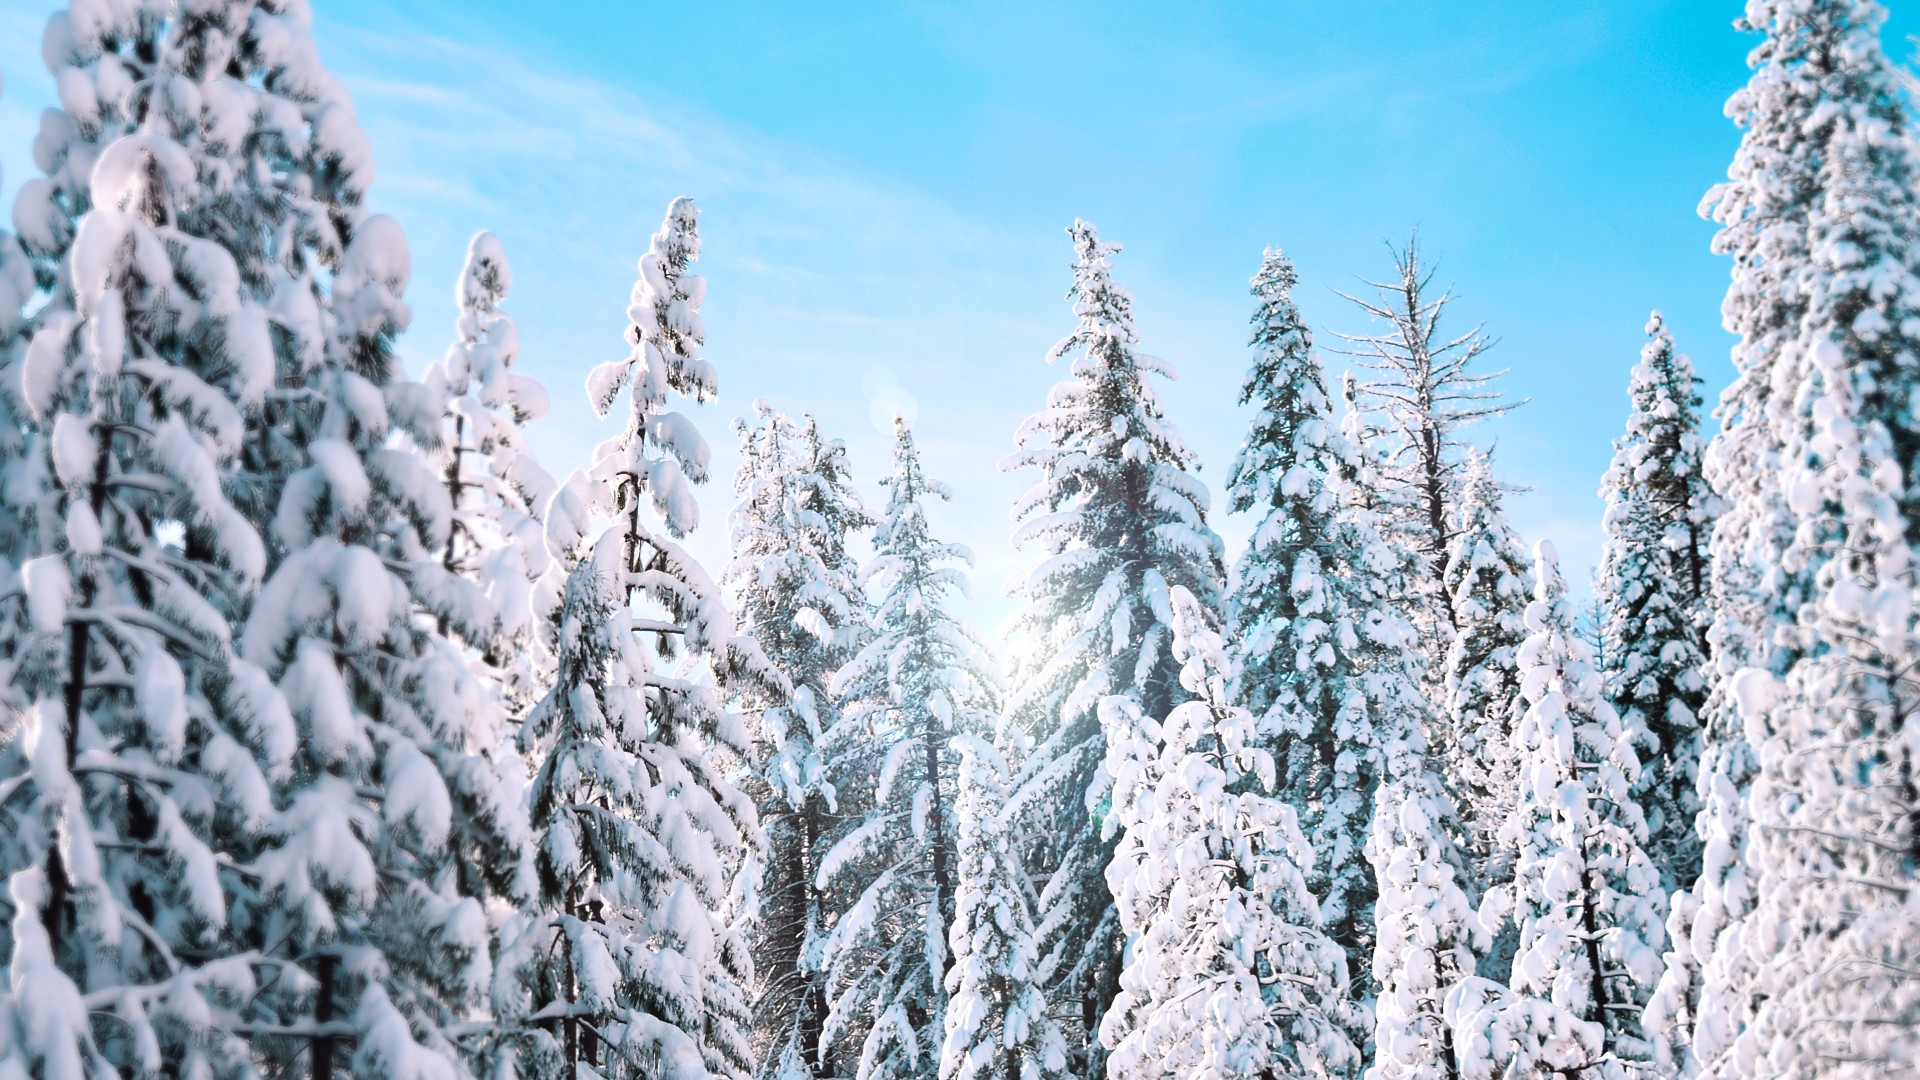 Download Sunny Winter Pine Trees Hd Wallpaper Iphone 7 Plus Iphone